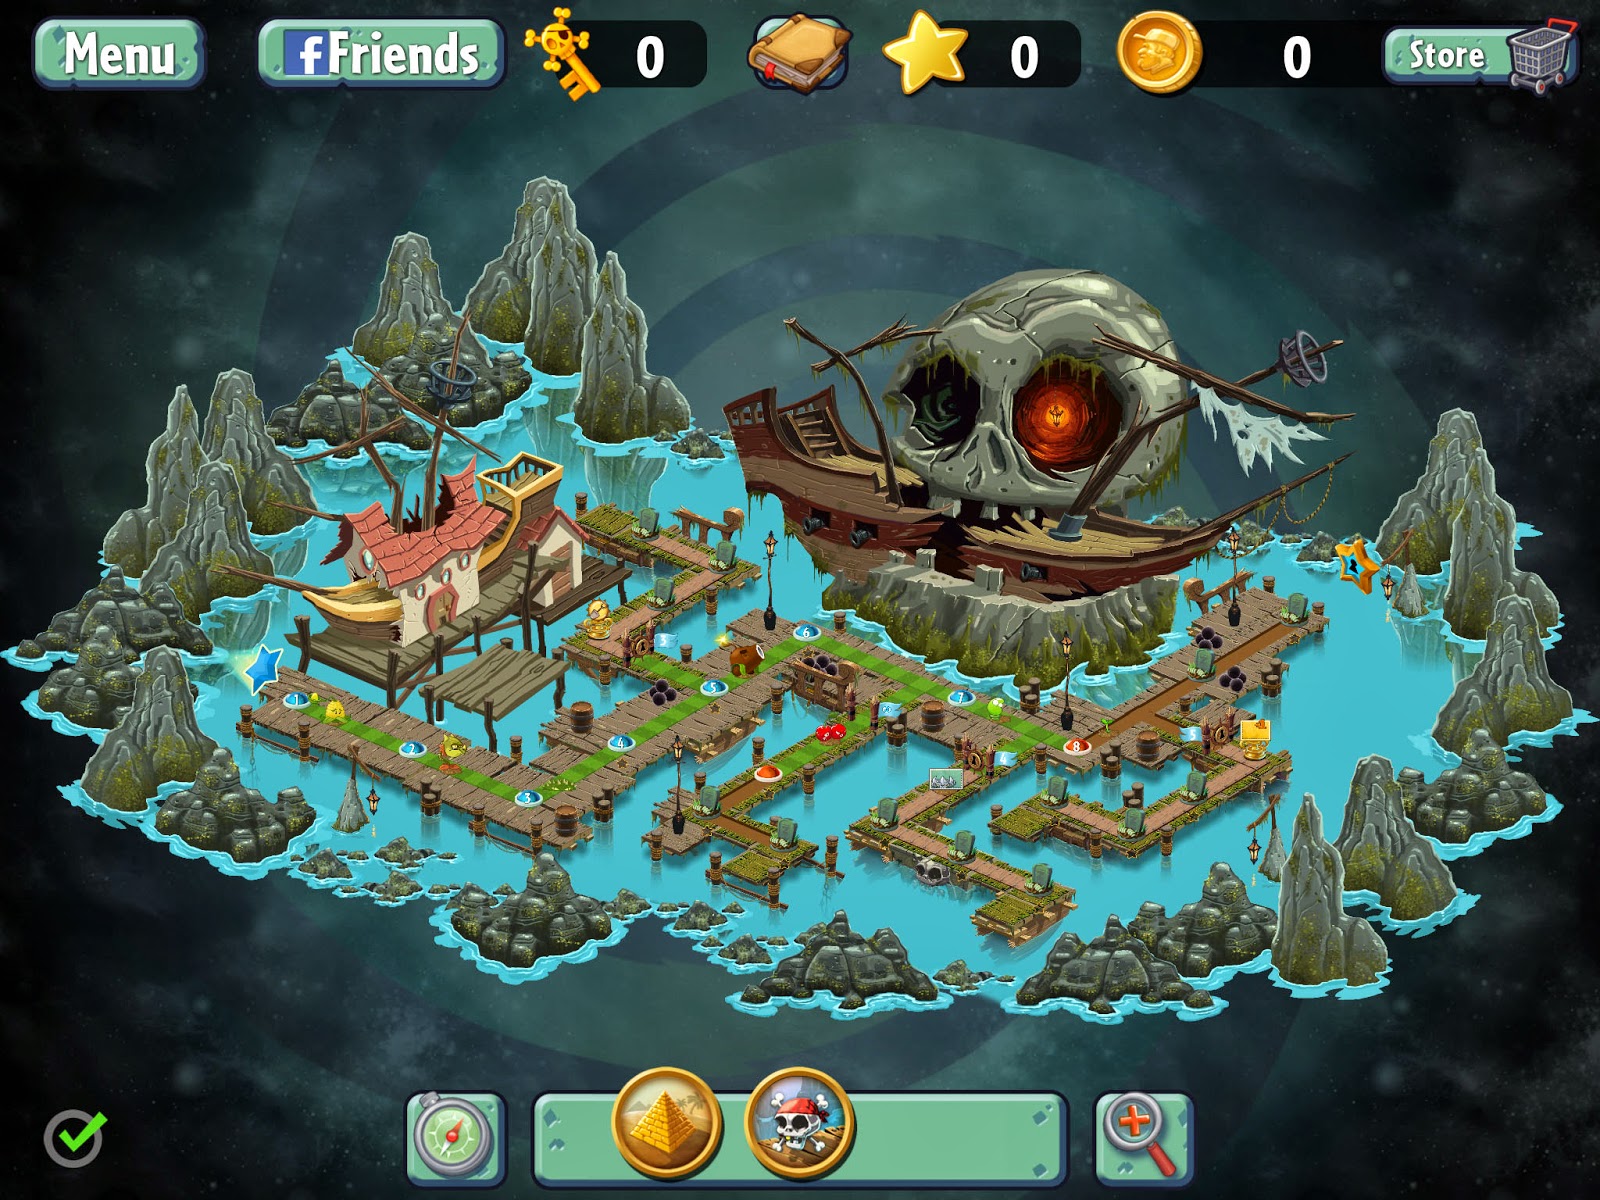 Gamasutra Michail Katkoff 39 S Blog Why Plants Vs Zombies 2 Can 39 T Make It To The Top